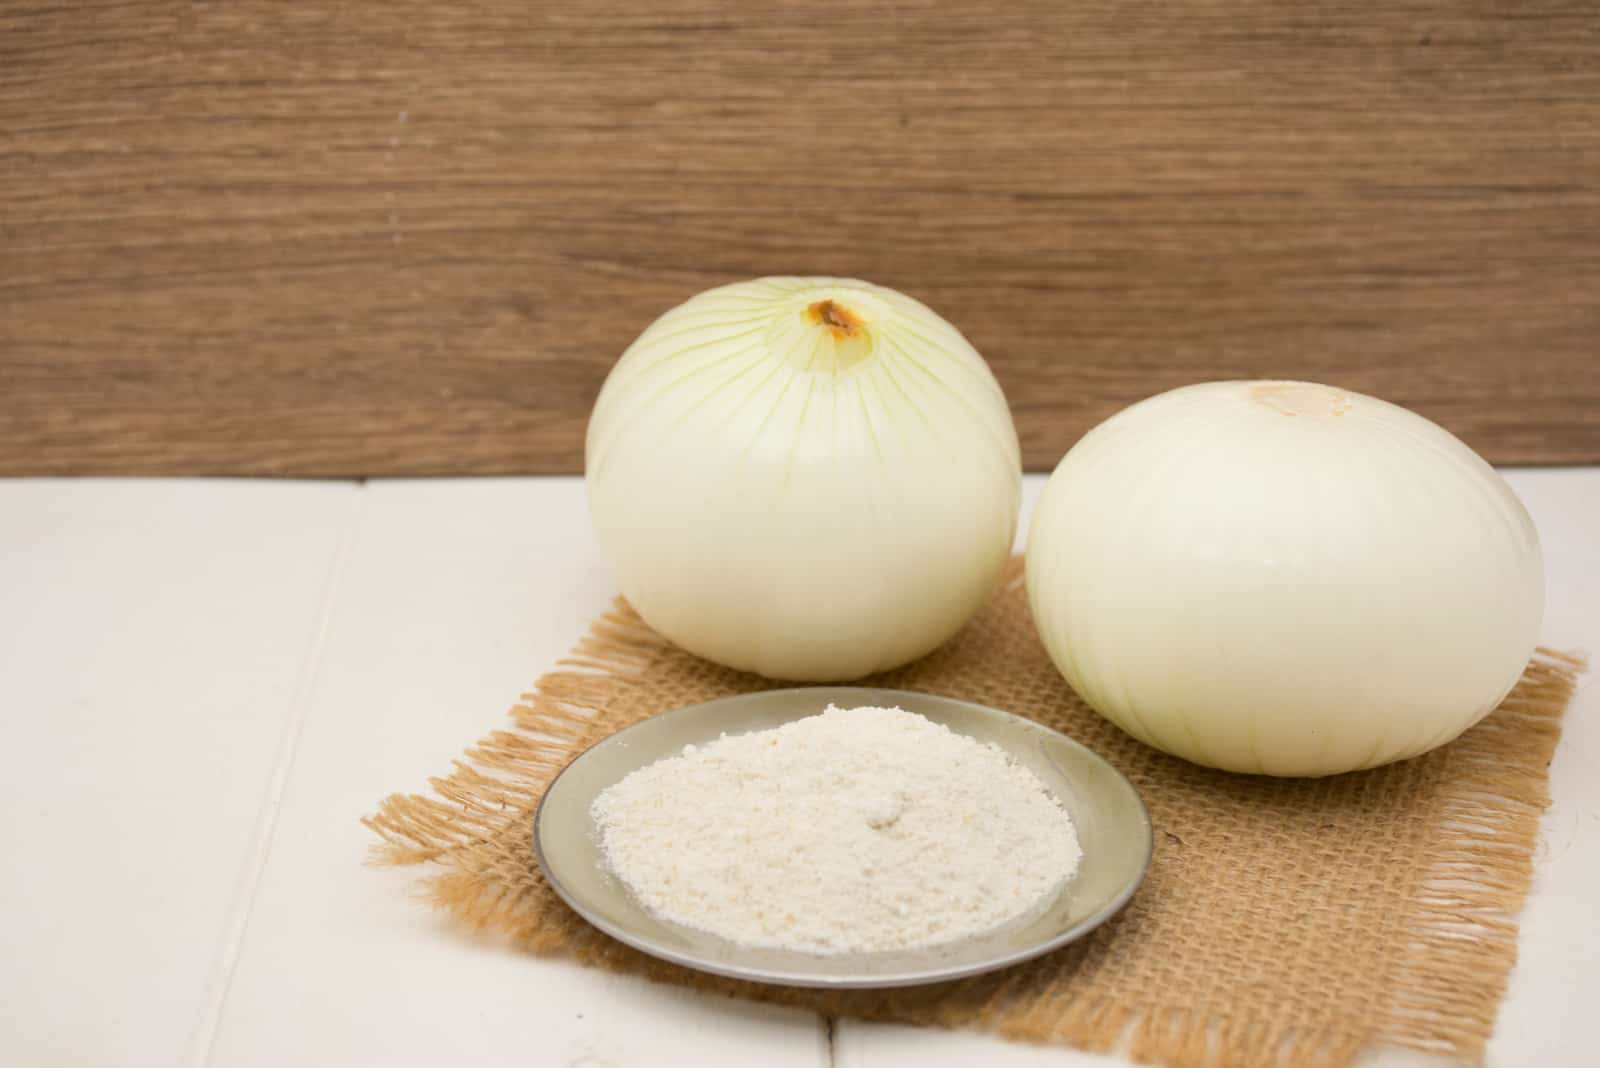 Ground white onion or onion powder, fresh and natural